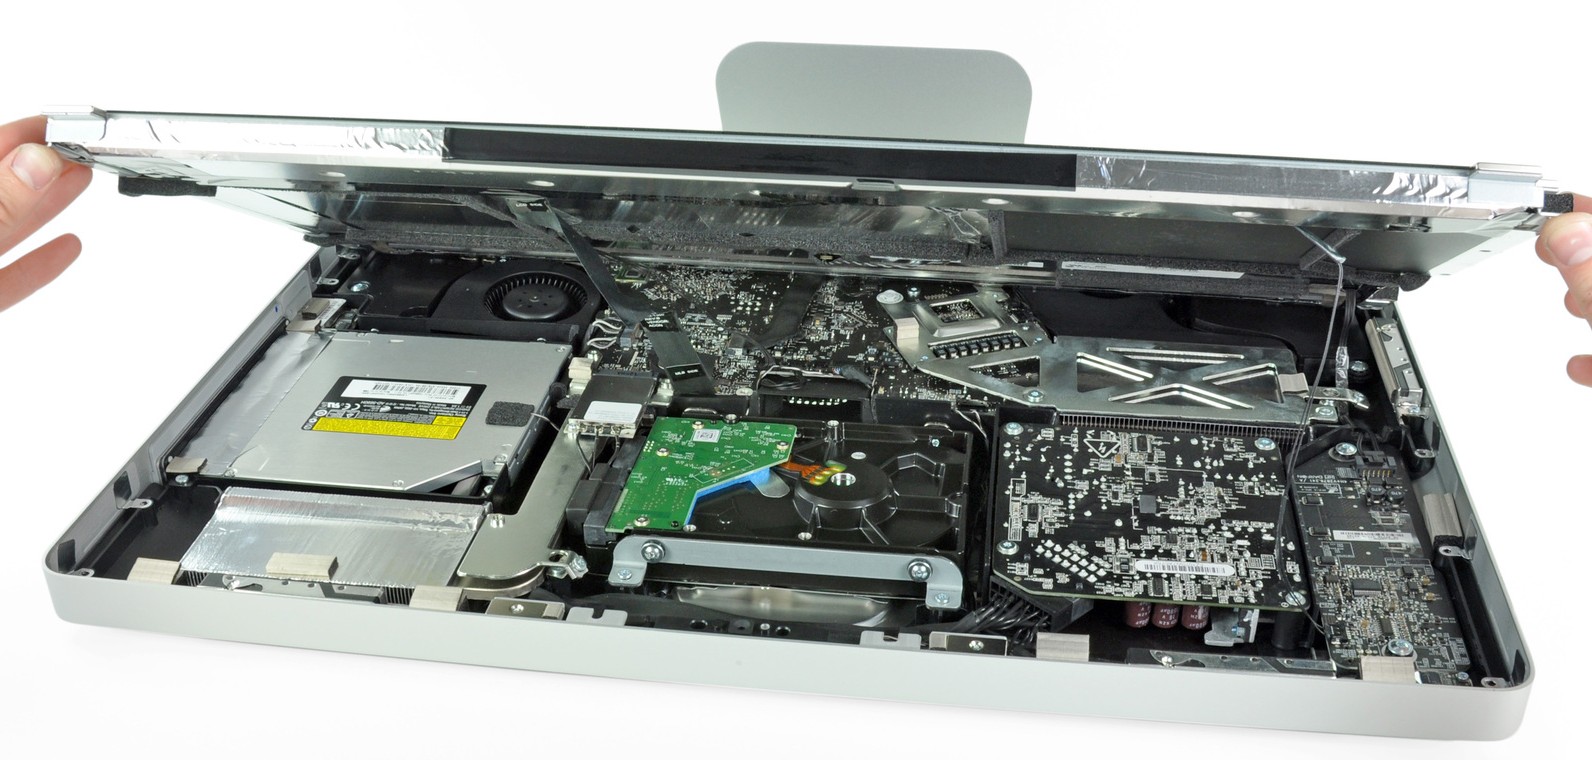 iMac reveals LG display, swappable mounted SSD - 9to5Mac